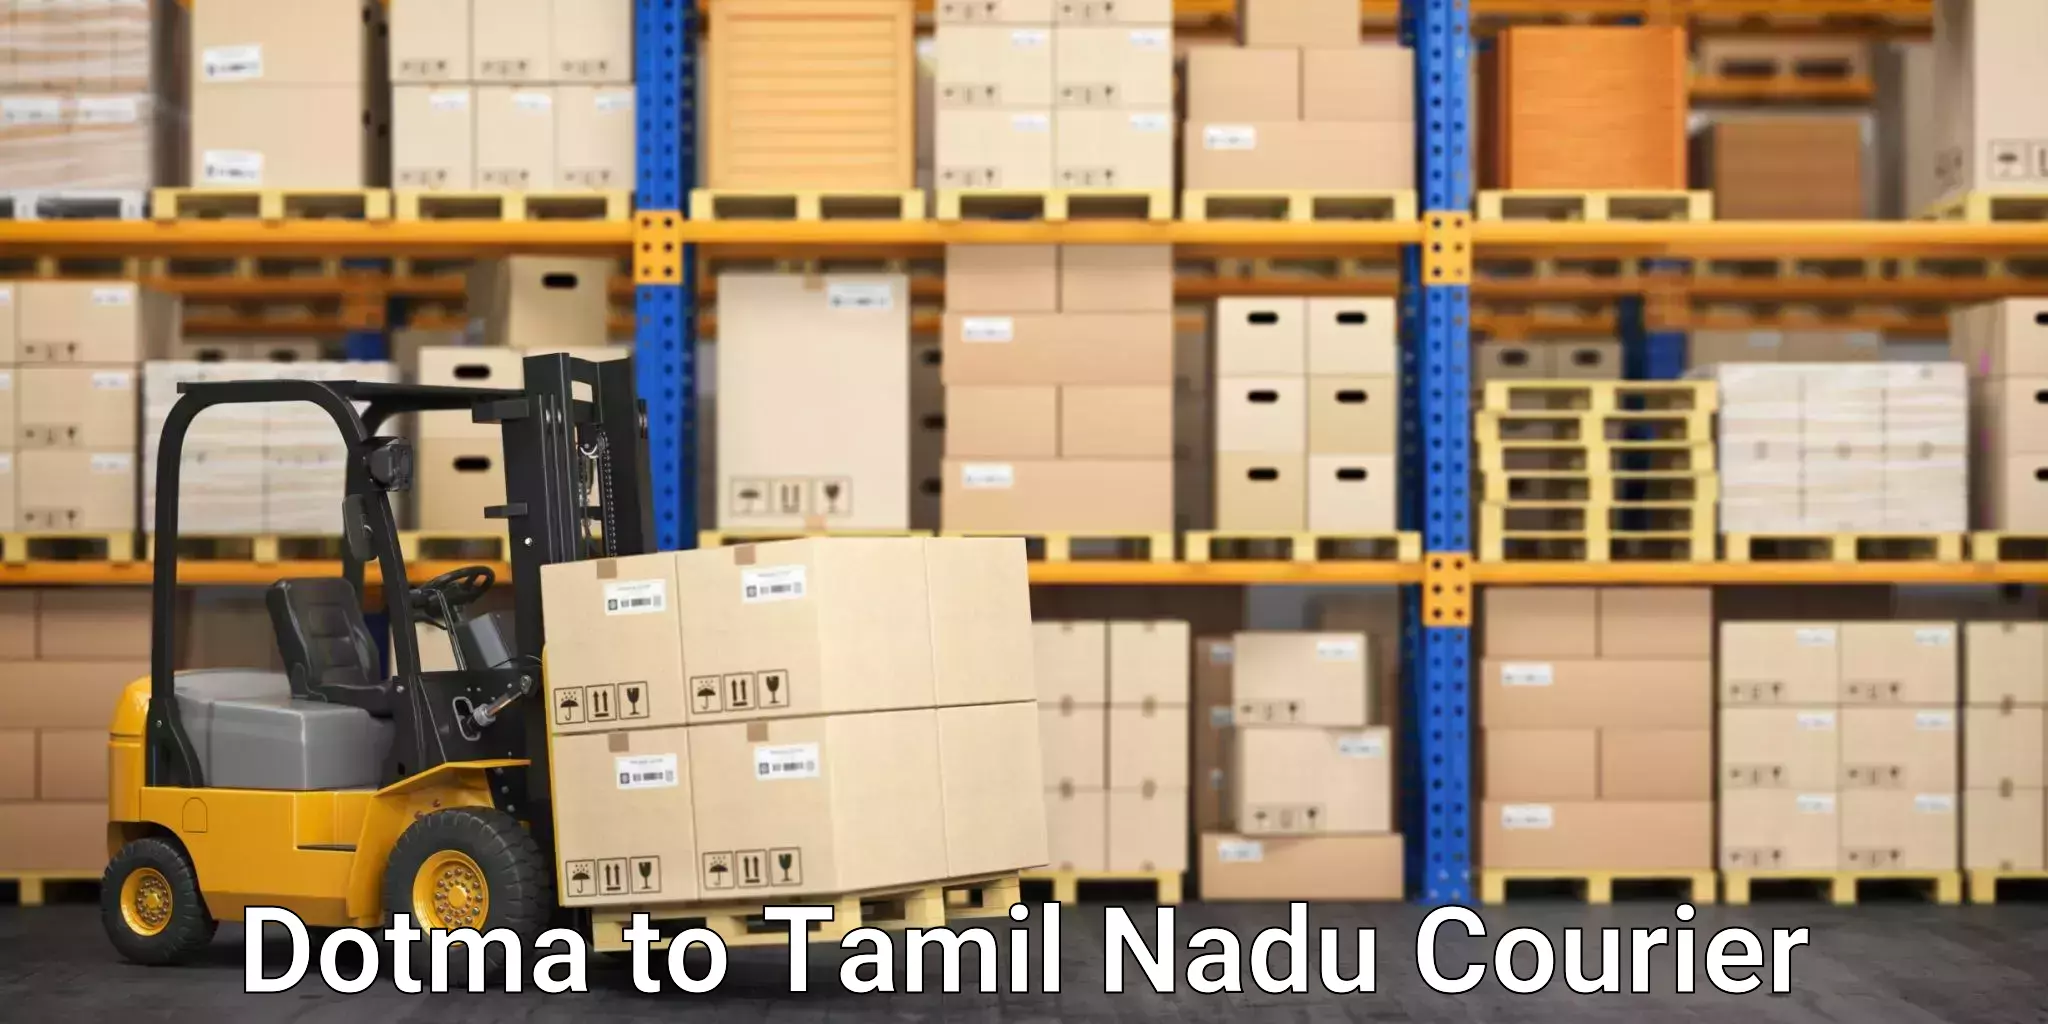 Reliable delivery network Dotma to Ennore Port Chennai